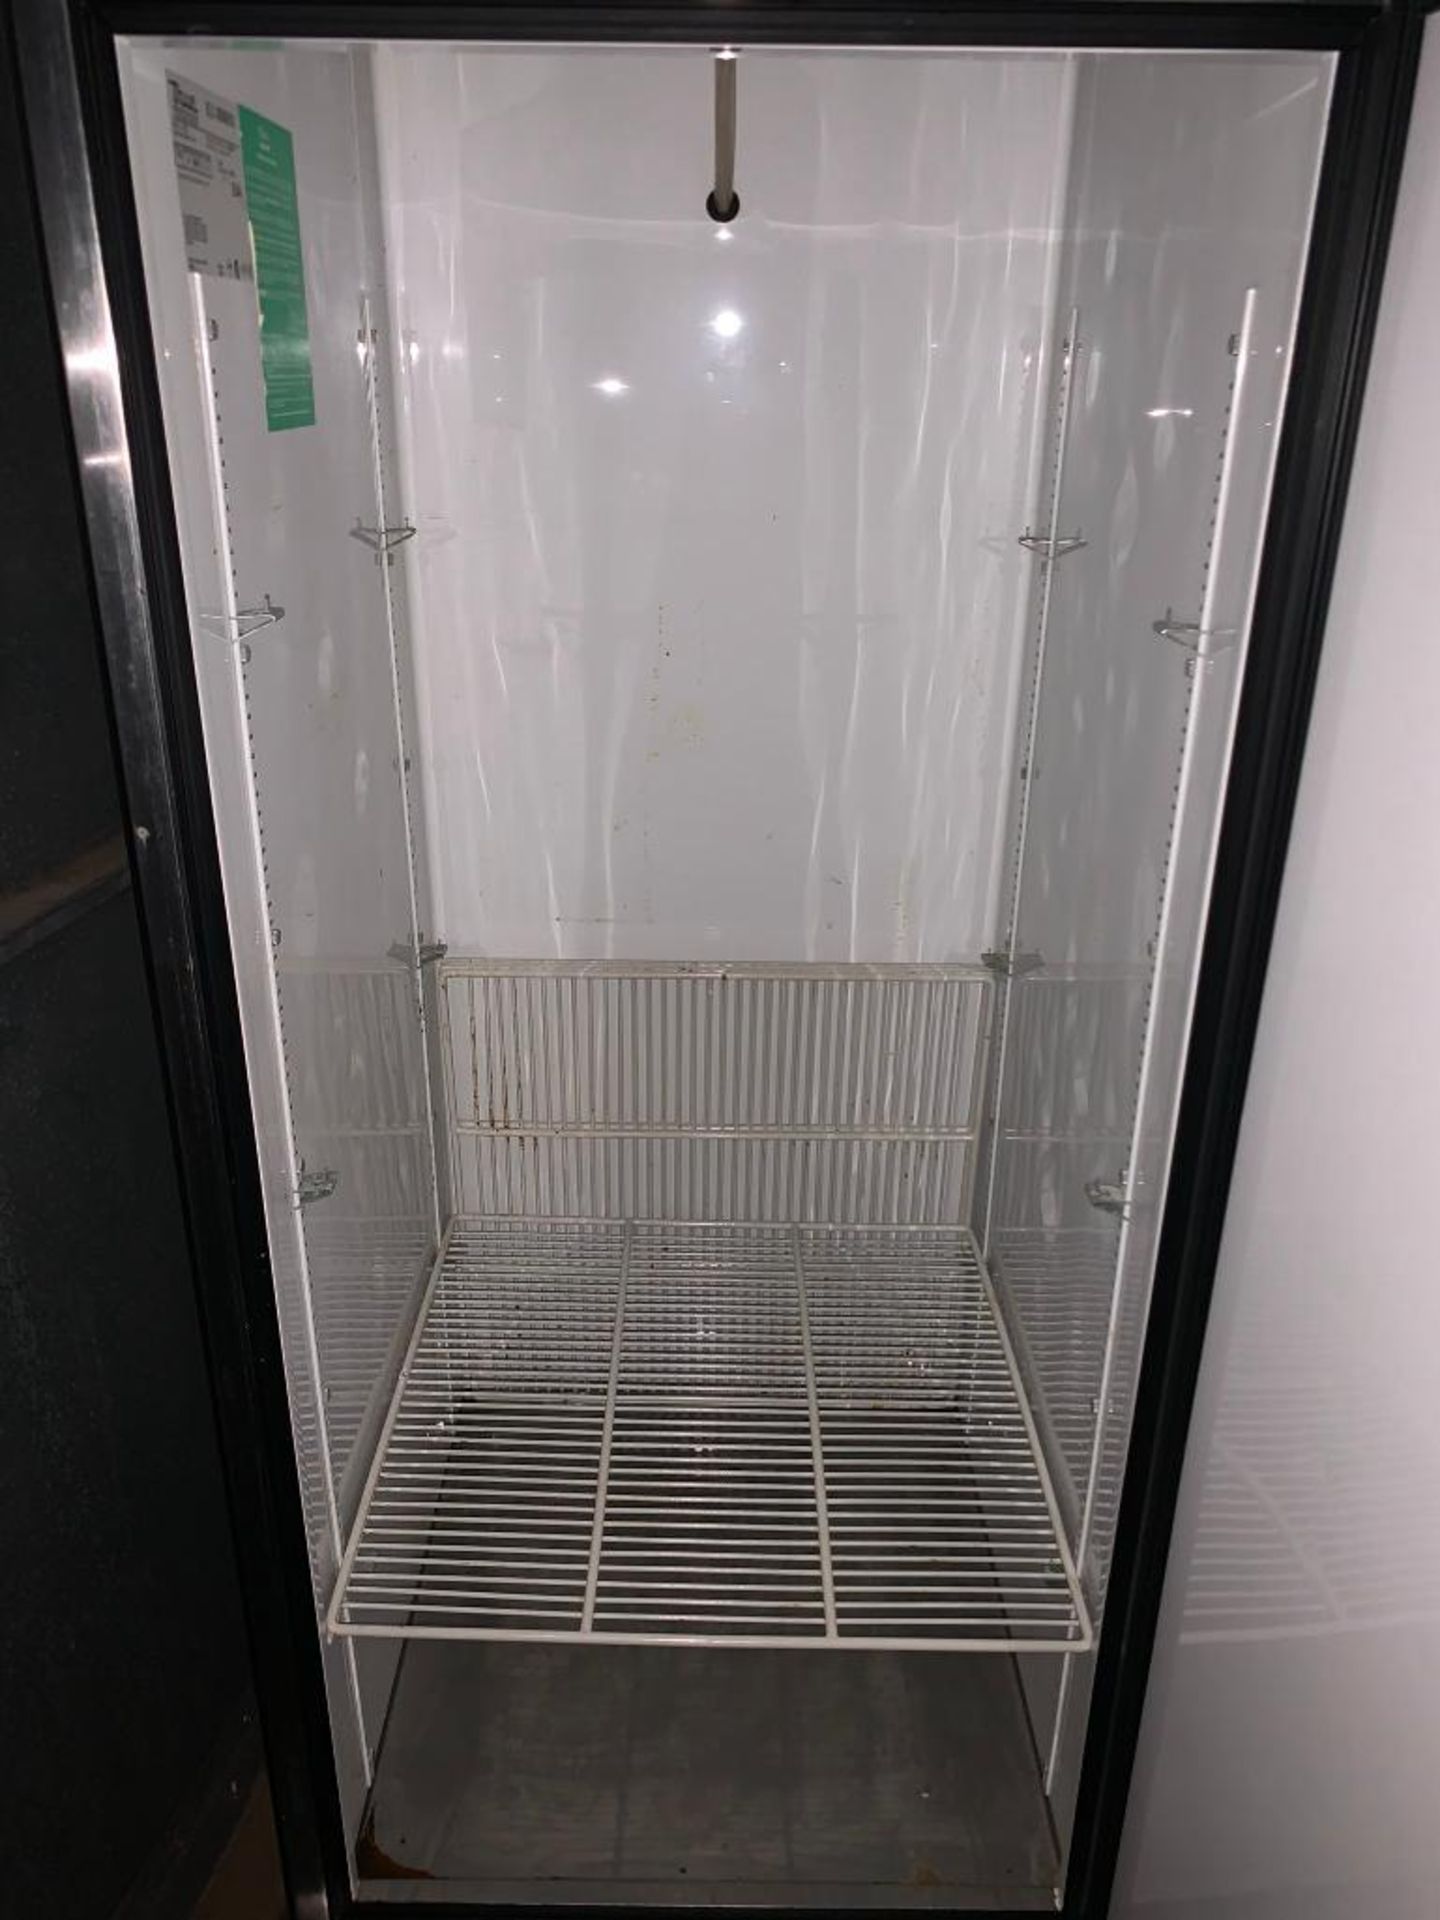 True Stainless Steel Commercial Refrigerator - Image 3 of 4